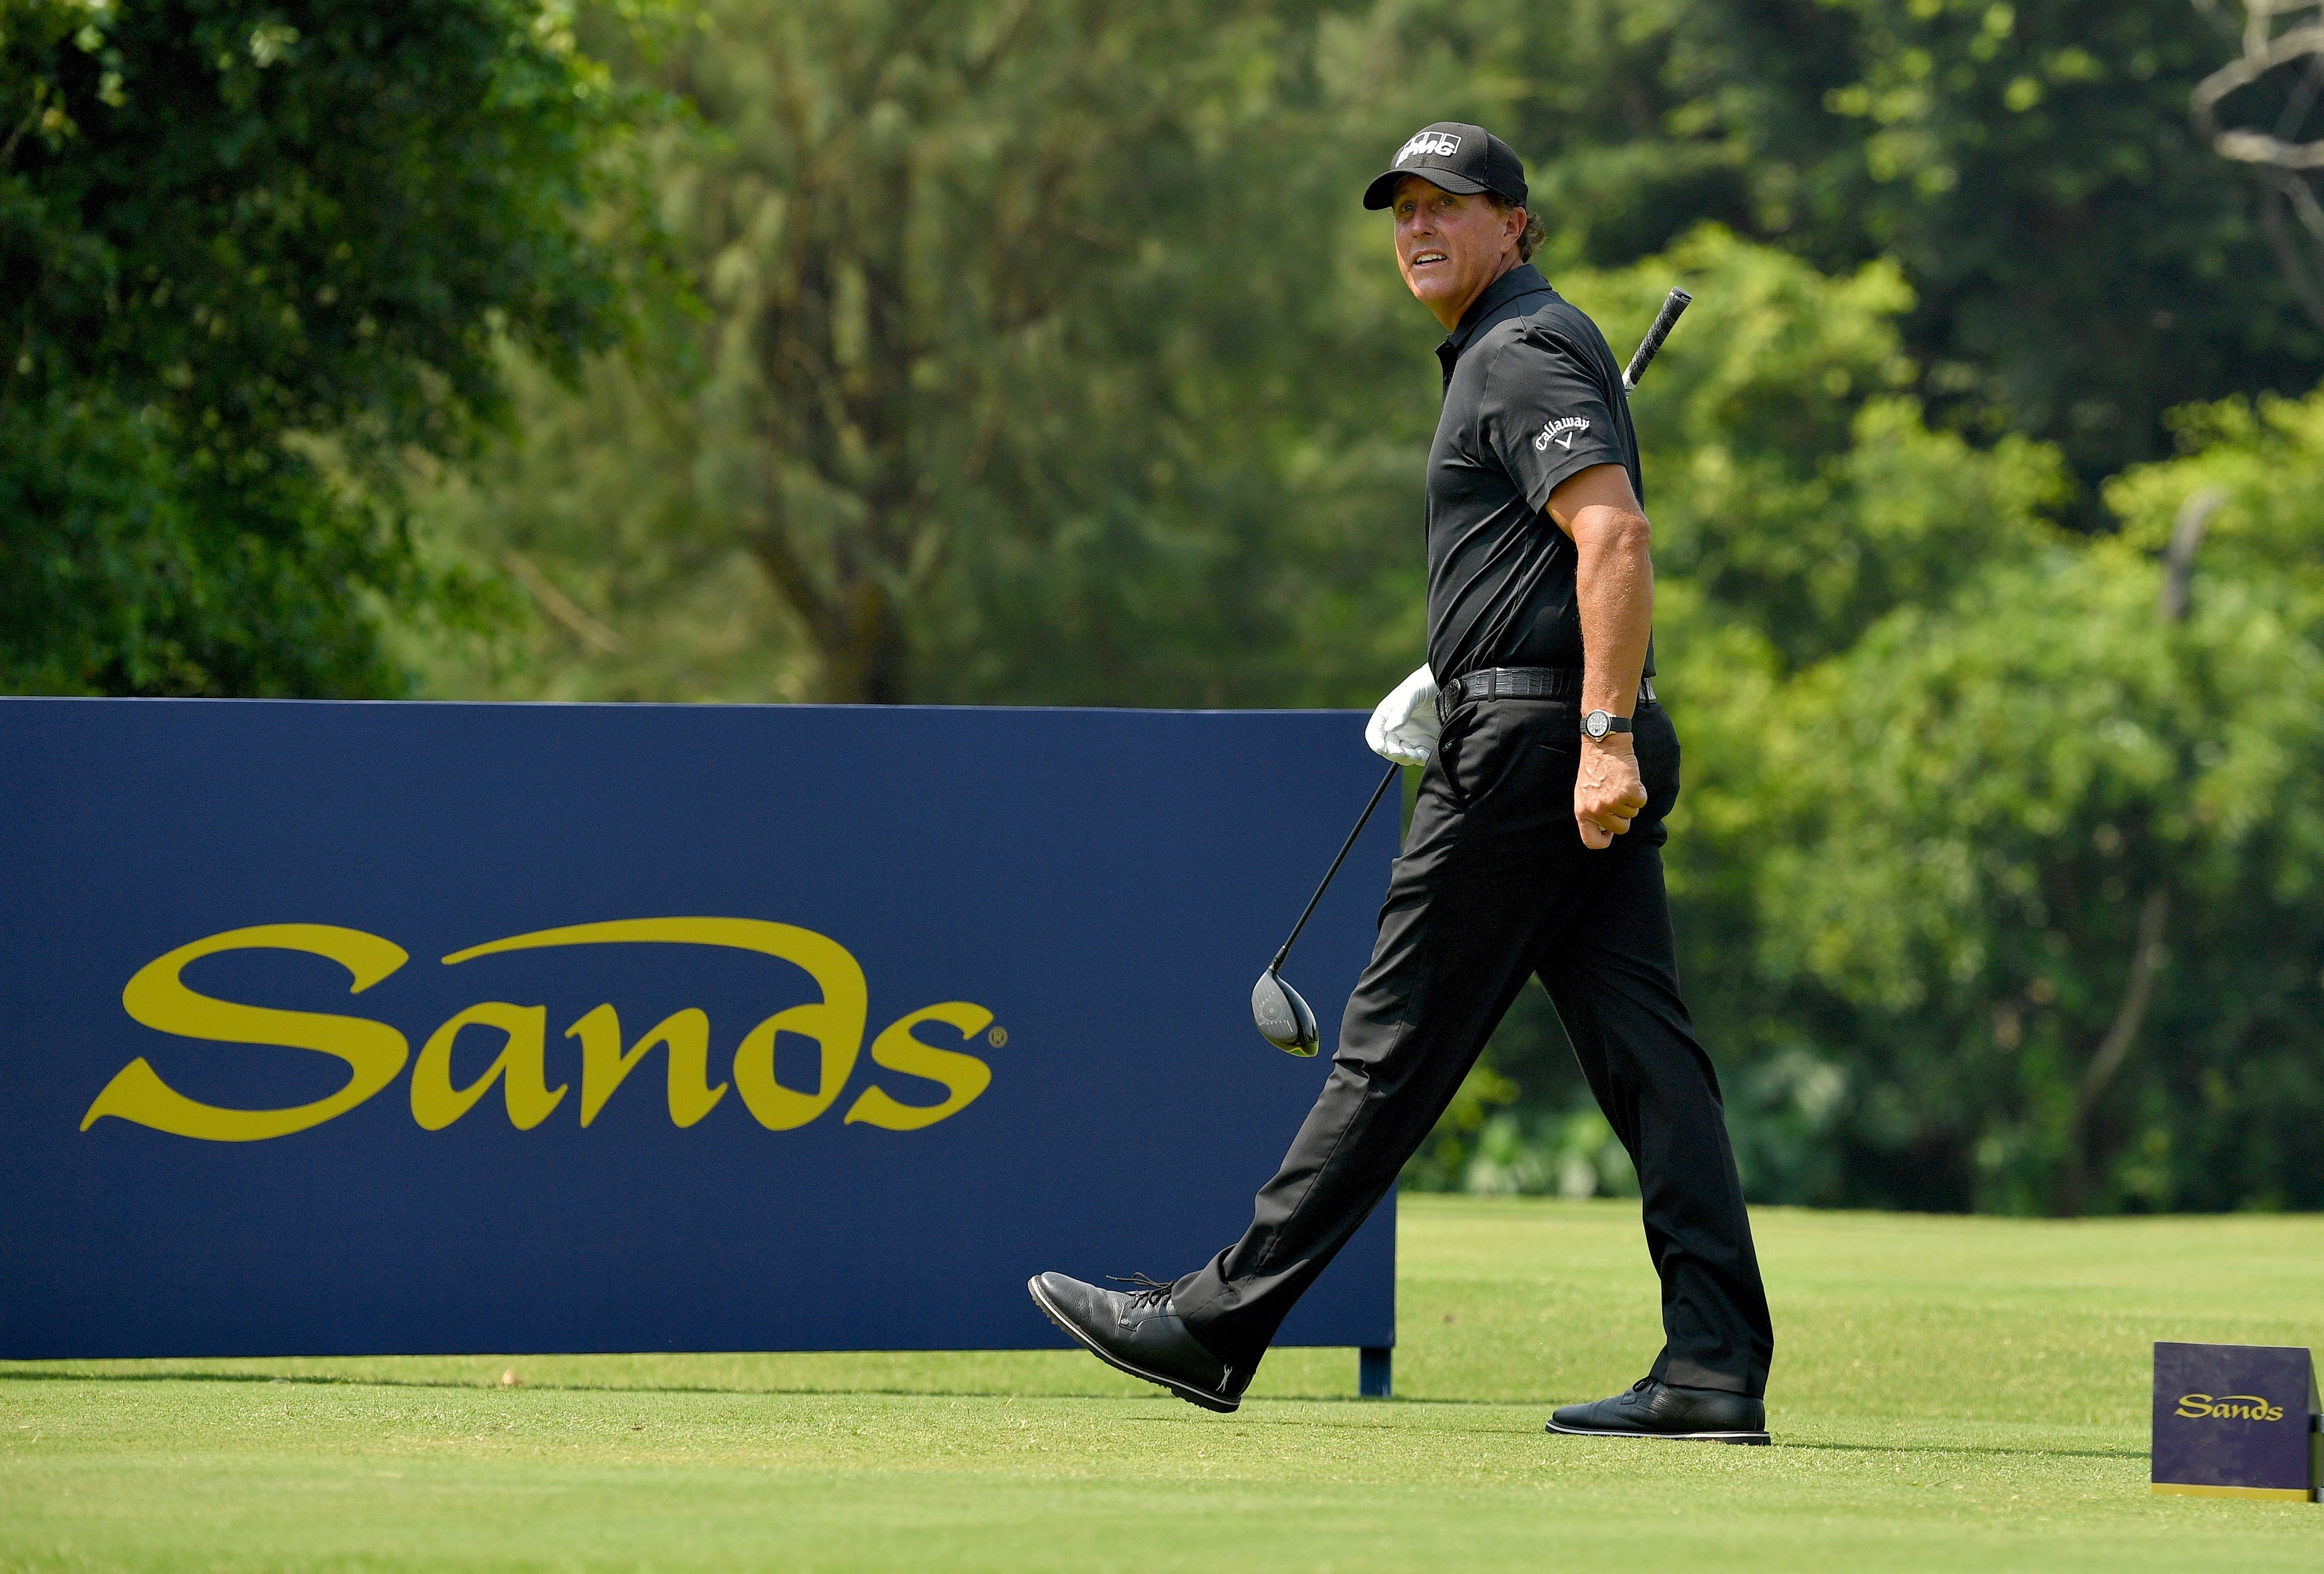 Phil Mickelson pictured during the Sands Pro-am Invitational at the Macau Golf and Country Club. Photo: Paul Lakatos/Lagardere Sports